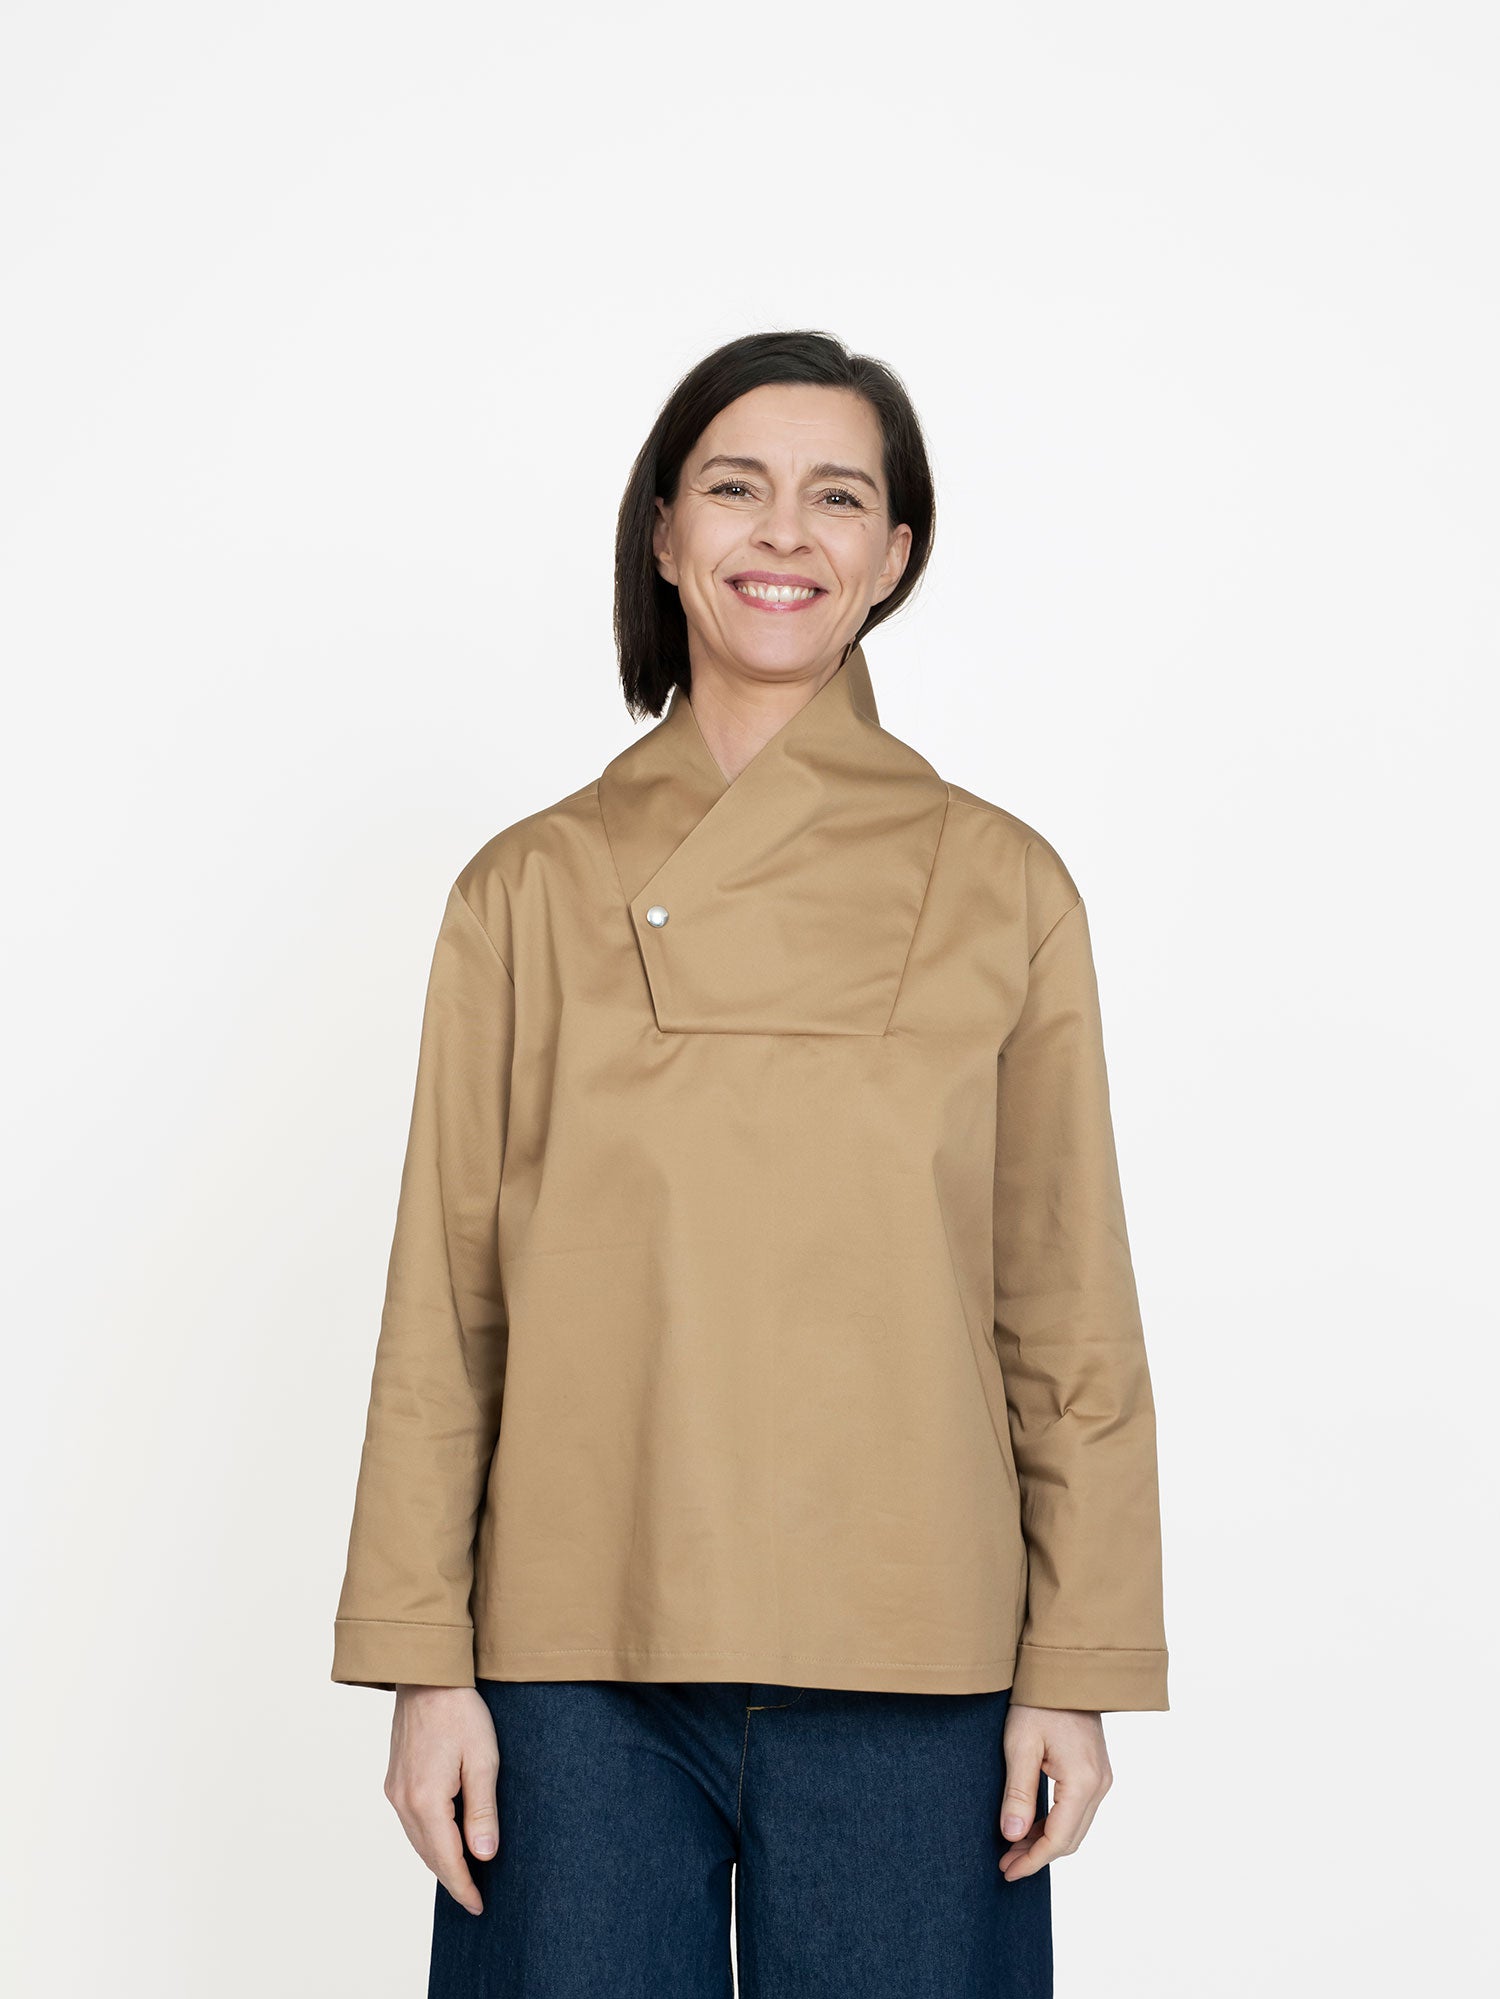 The Assembly Line Unisex Wrap Collar Shirt